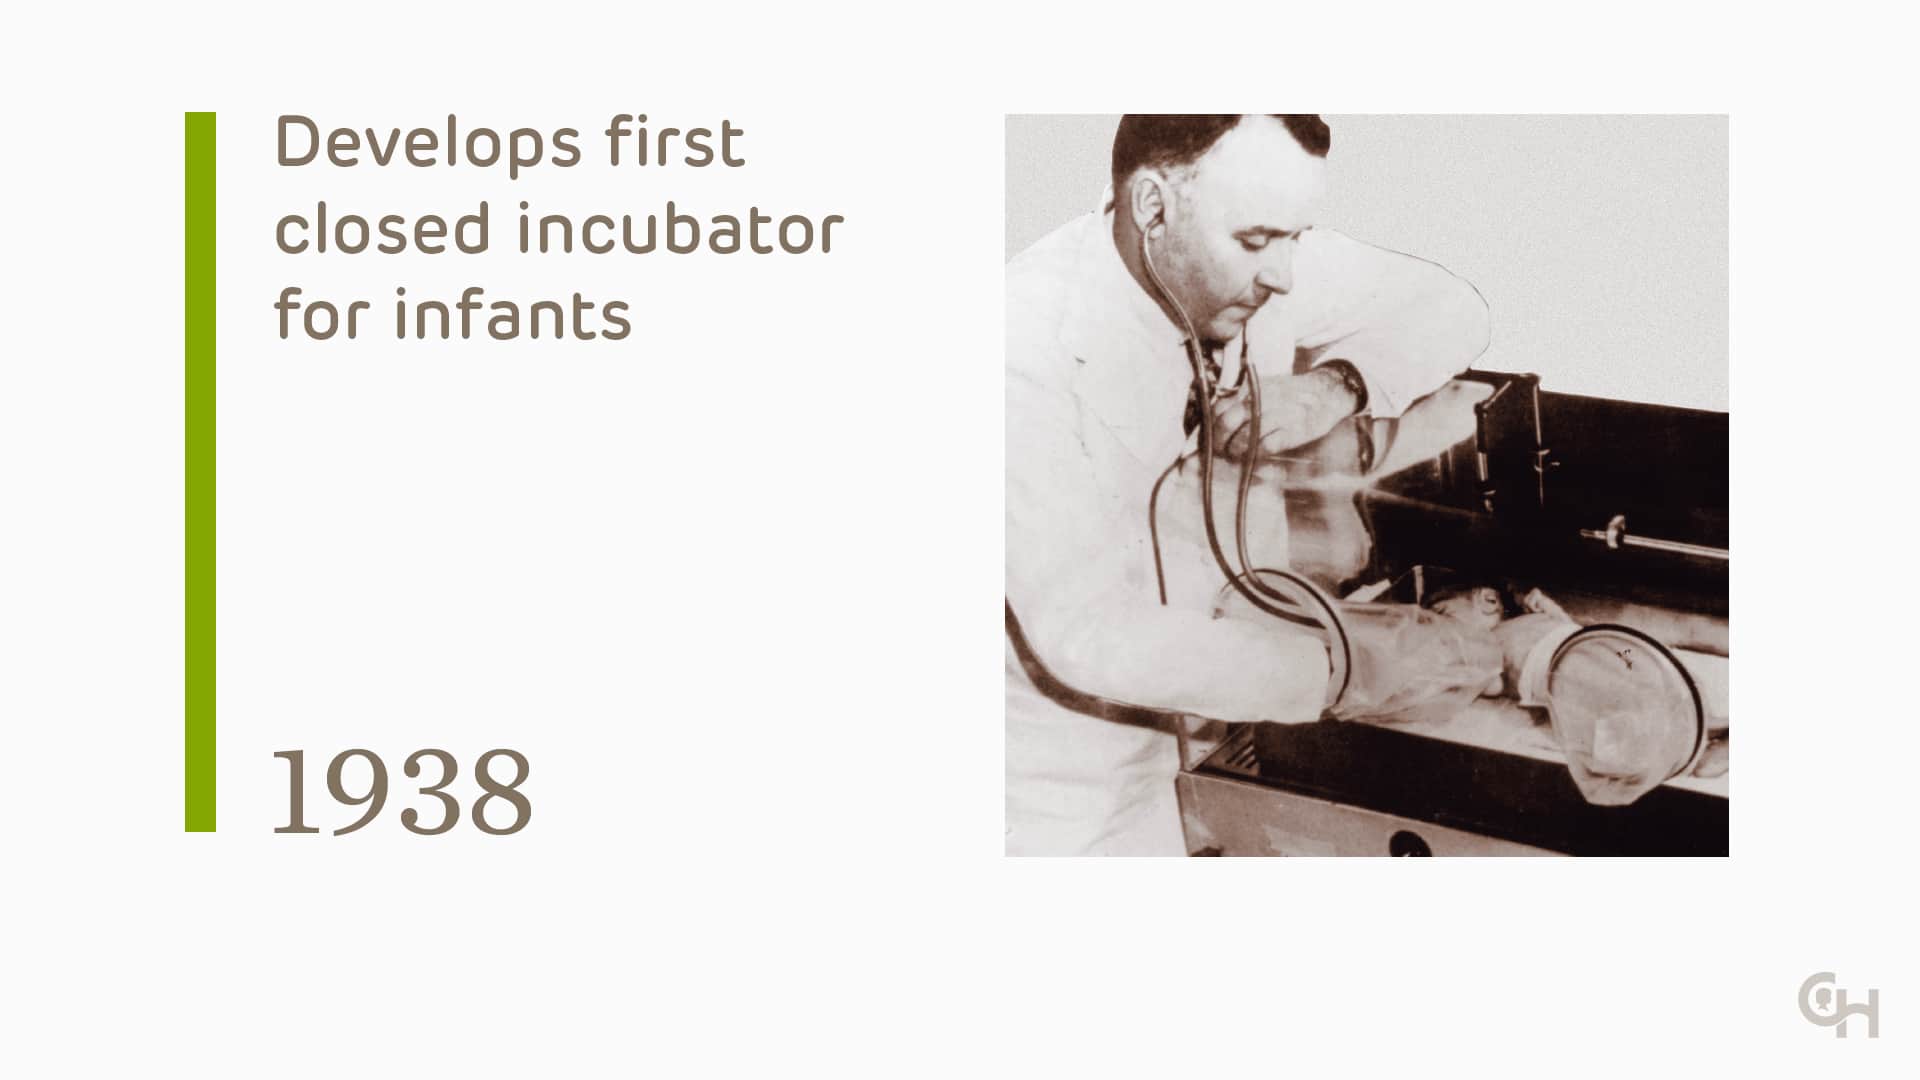 Develops first closed incubator for infants - 1938